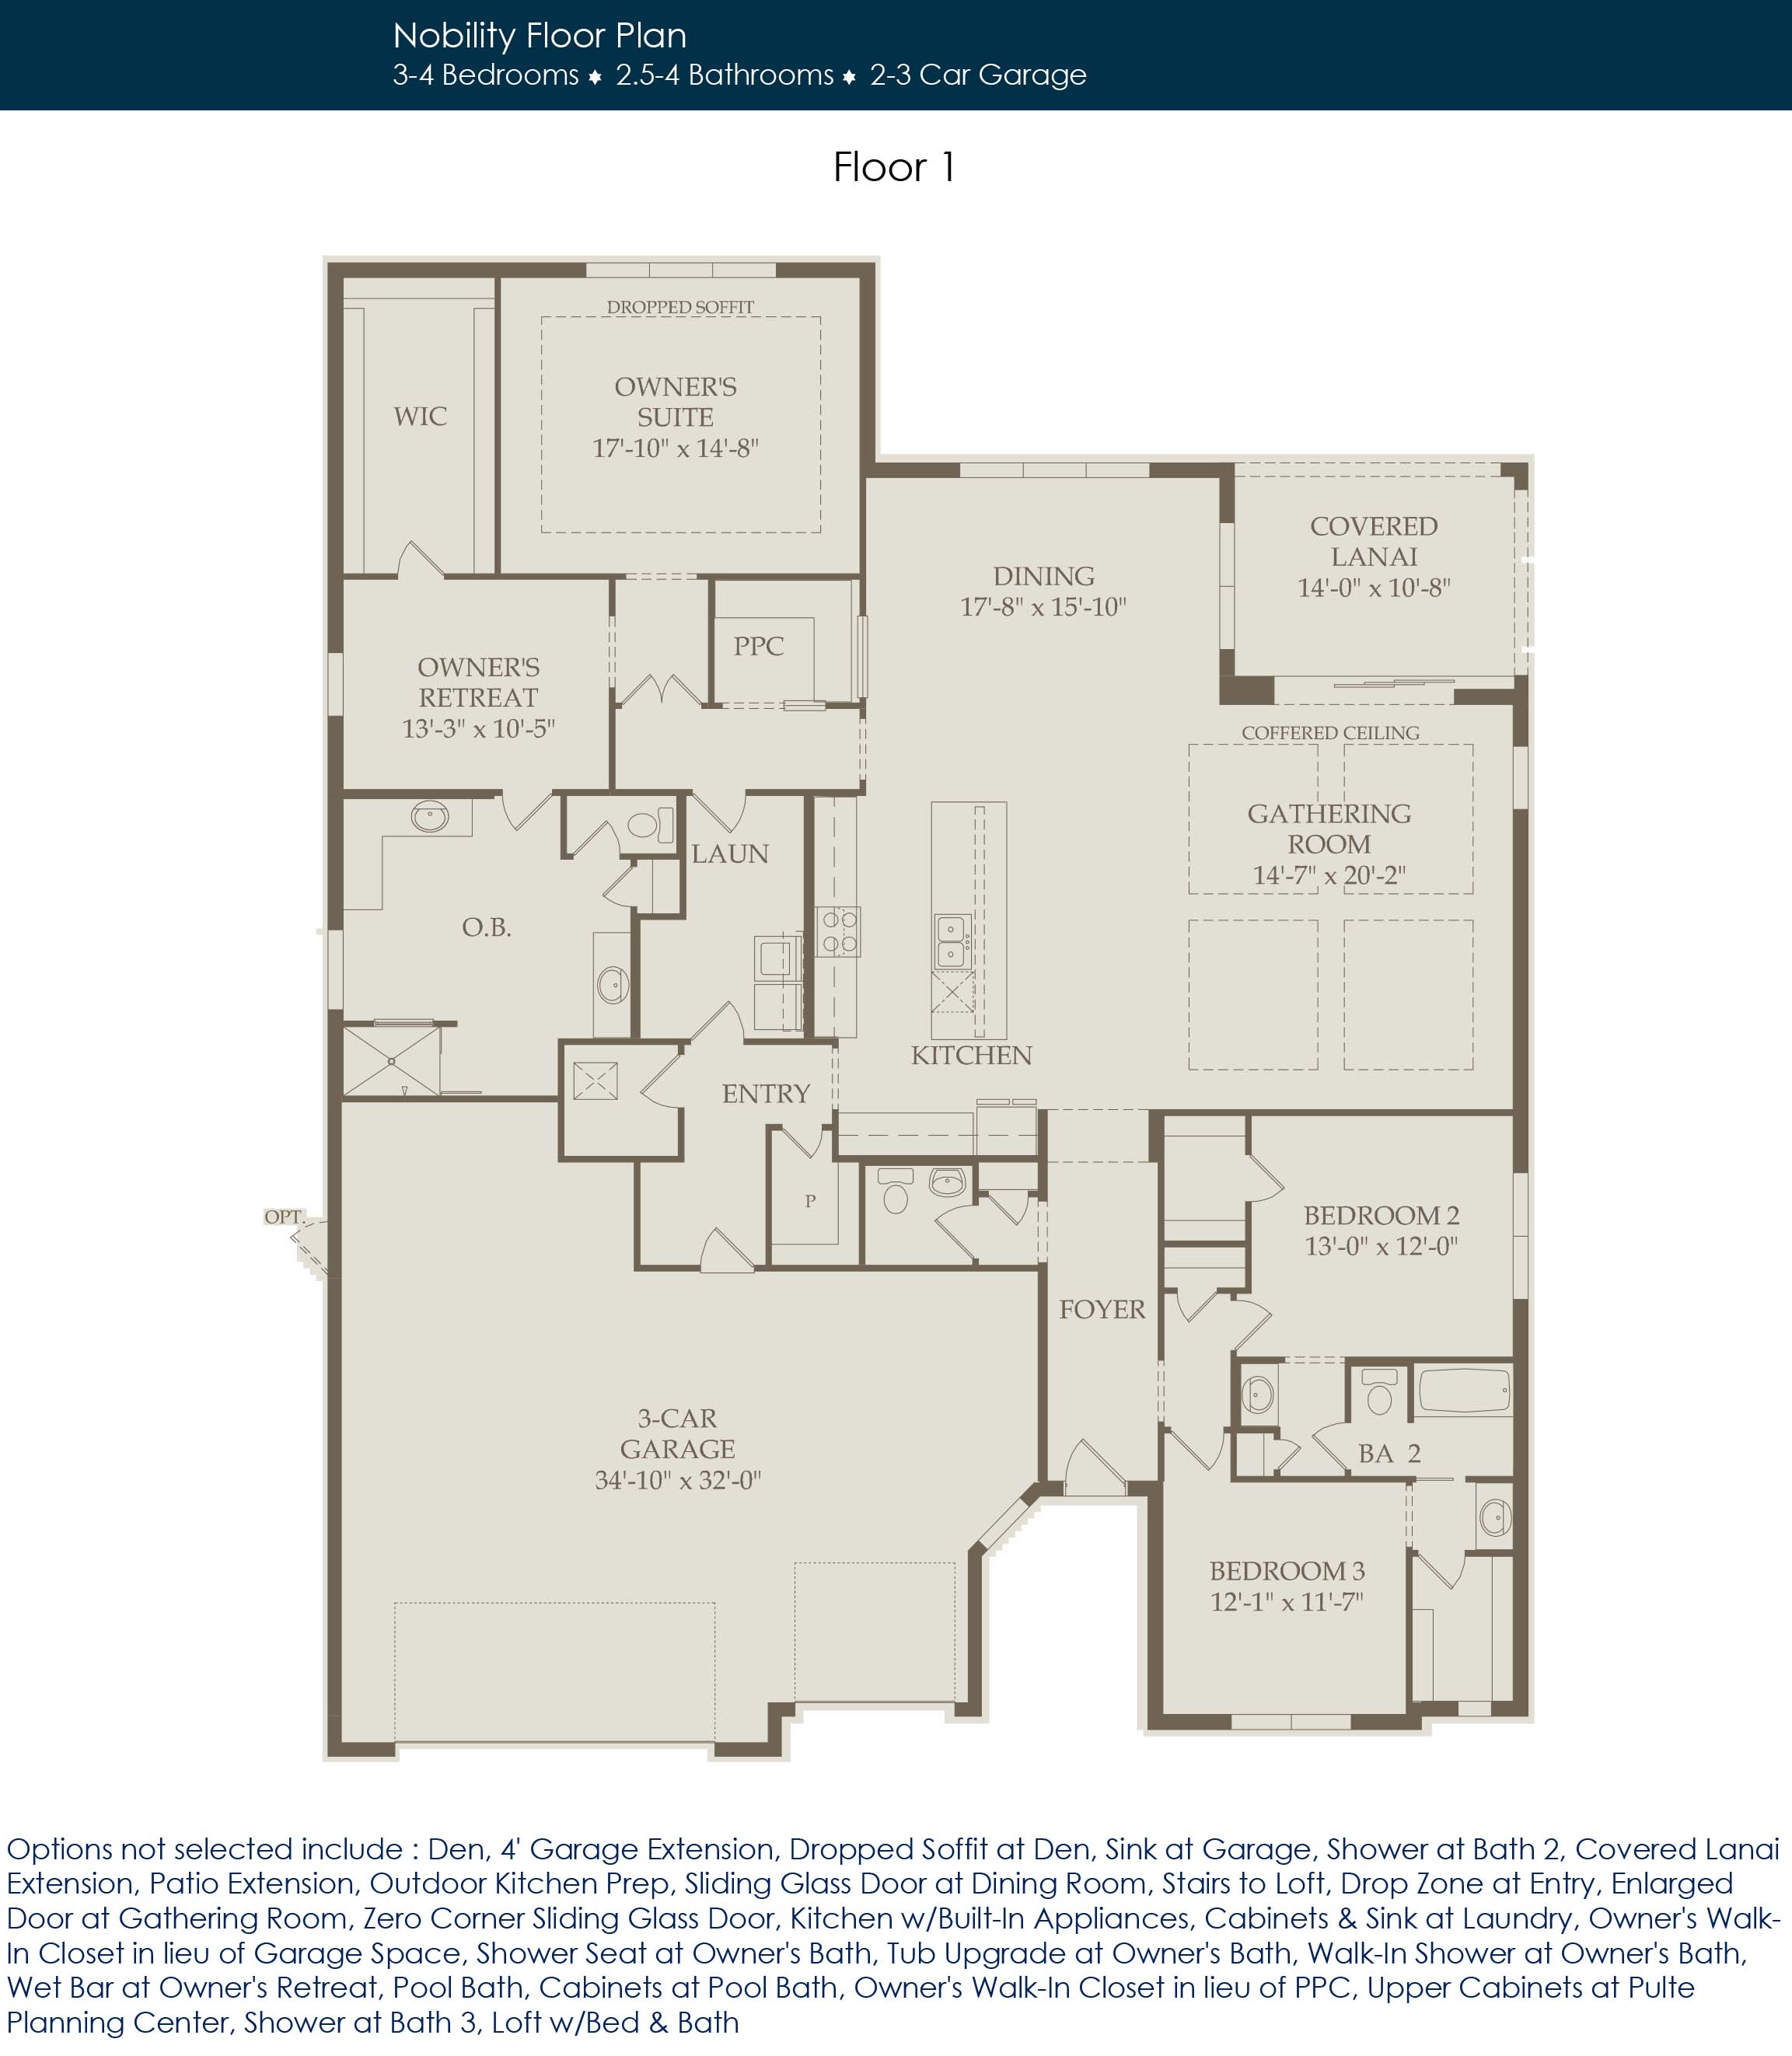 Pulte Home Designs WildBlue Homes for Sale in Estero FL